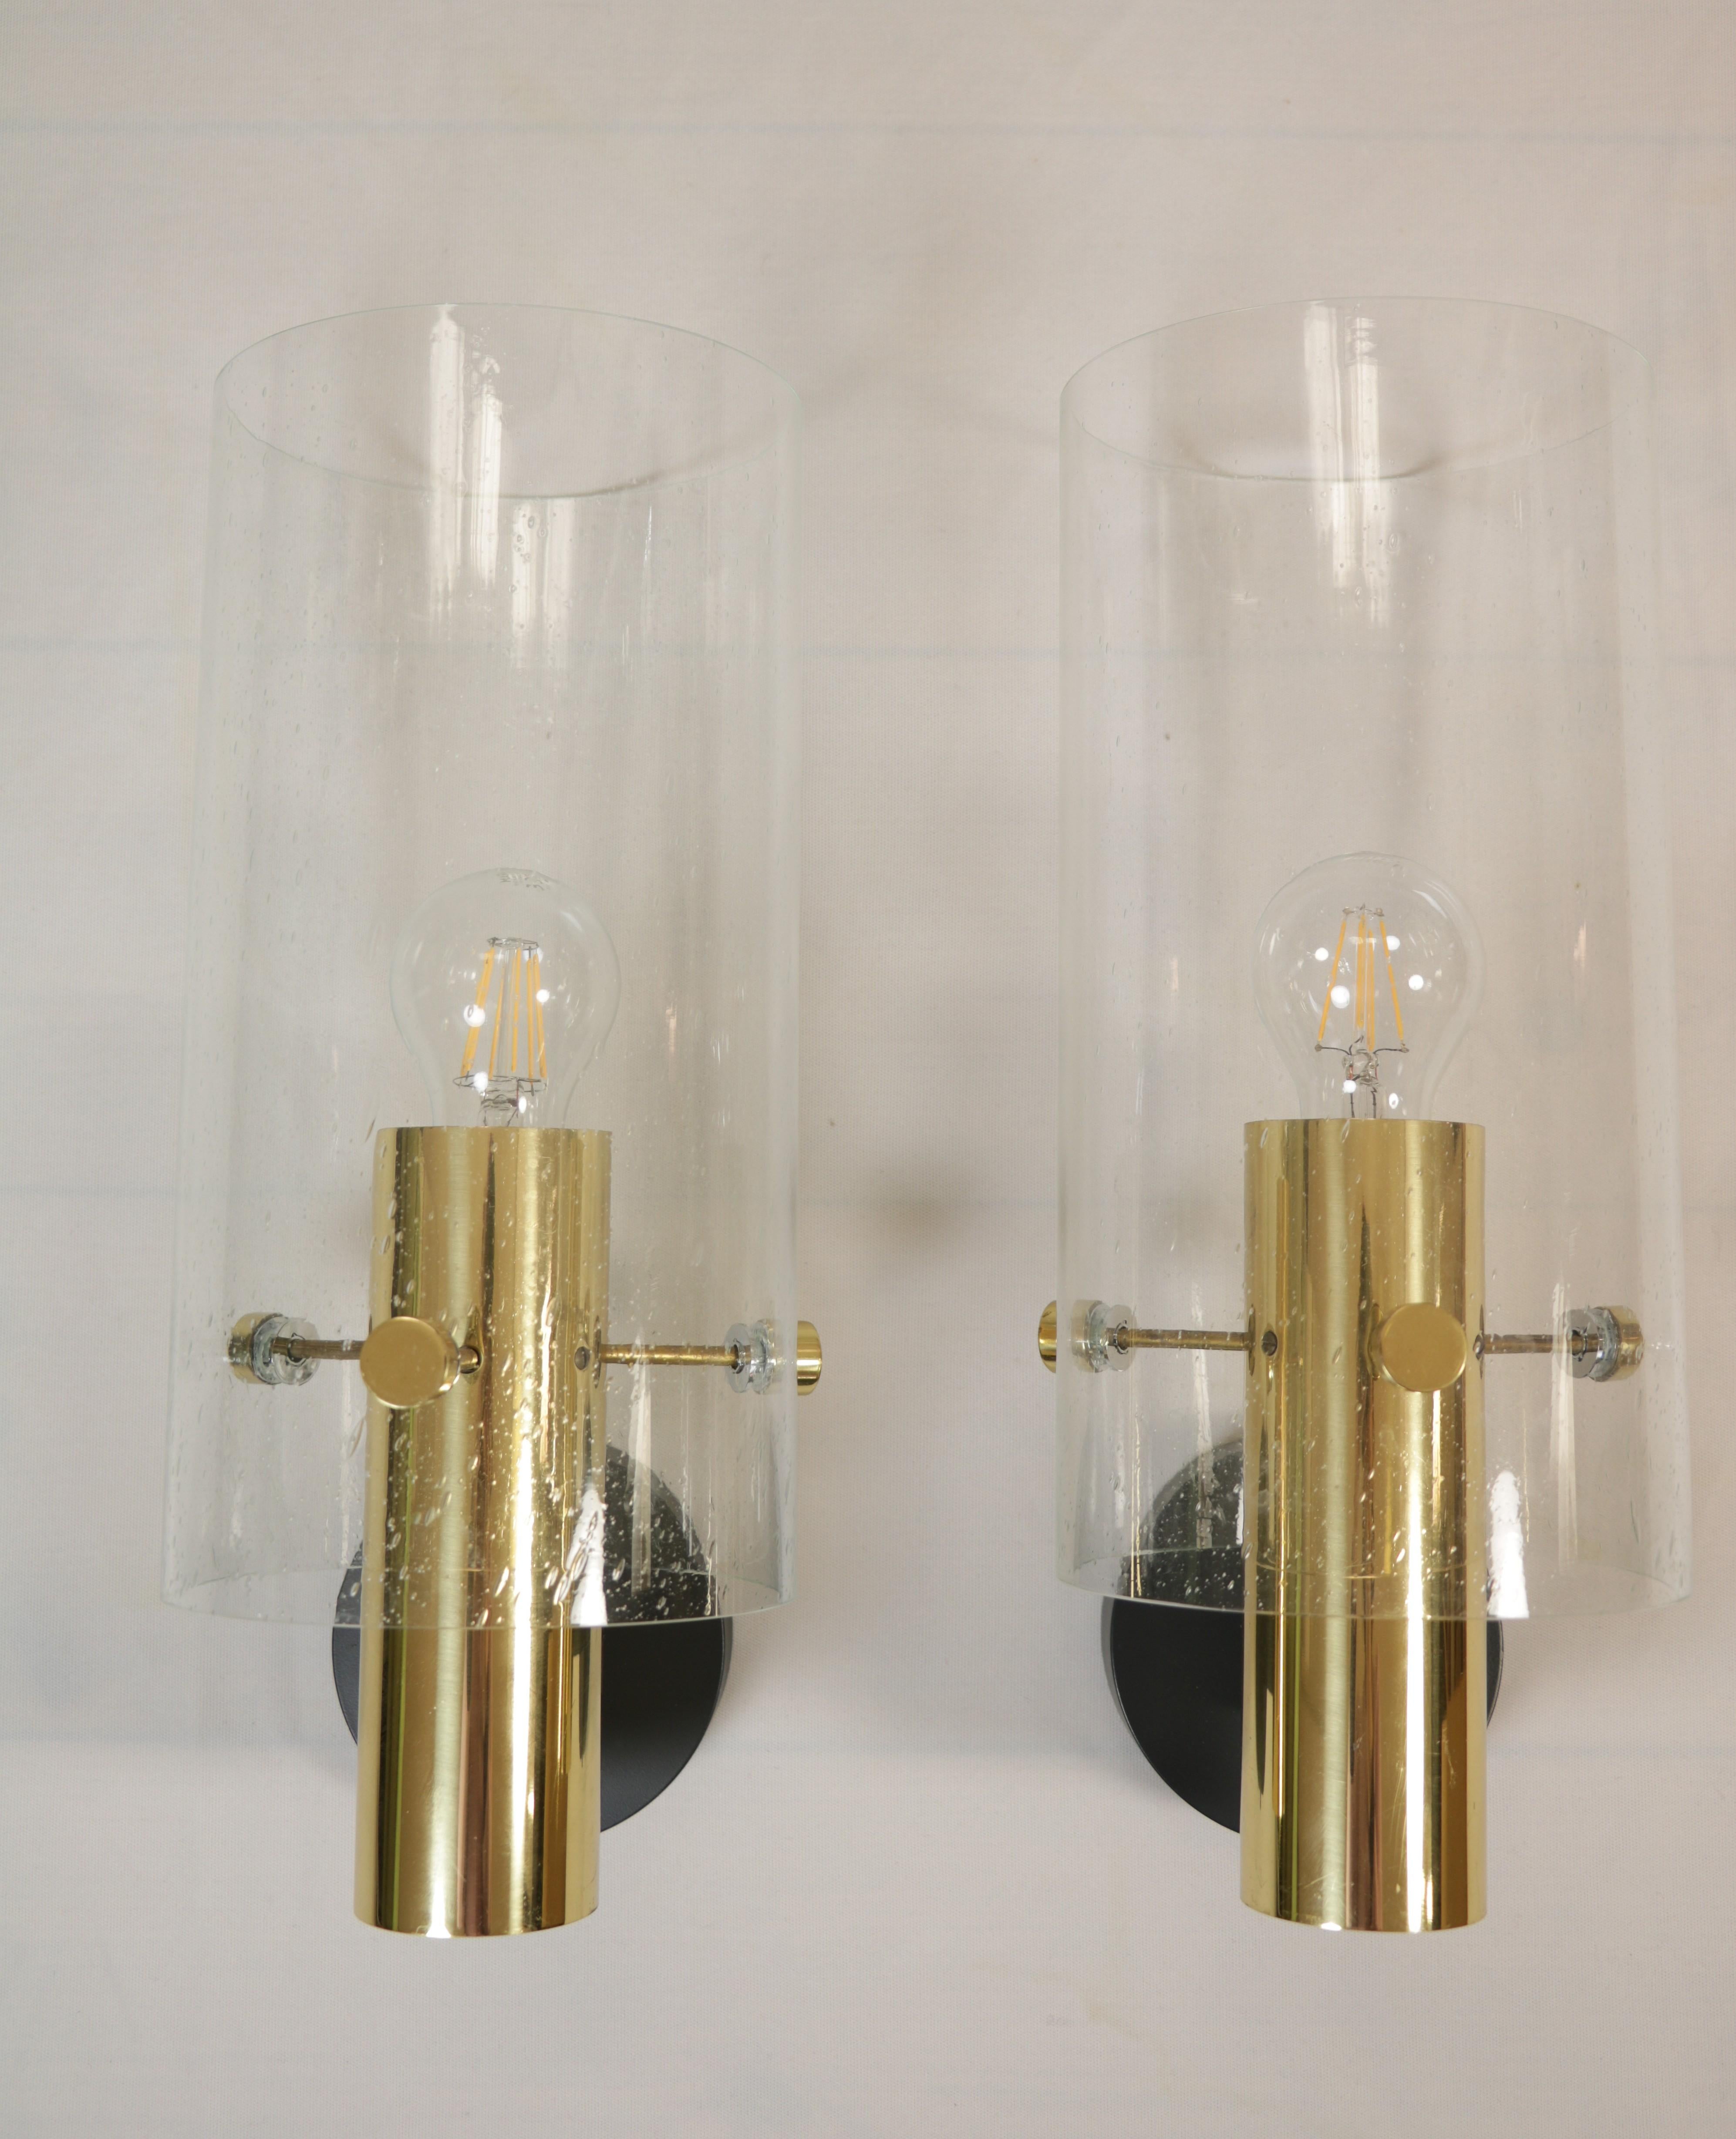 2 x large wall lamps by LIMBURG.
Glass with attractive enclosed bubbles.
 
Brass.
From a church.
Glasses new and unused, in OVP. 
 
Diameter Glass: 15.5 cm / 6.1 inch
Height: 37 cm / 14.56 inch
Height glass: 30 cm / 11.8 inch
Depth: 19 cm